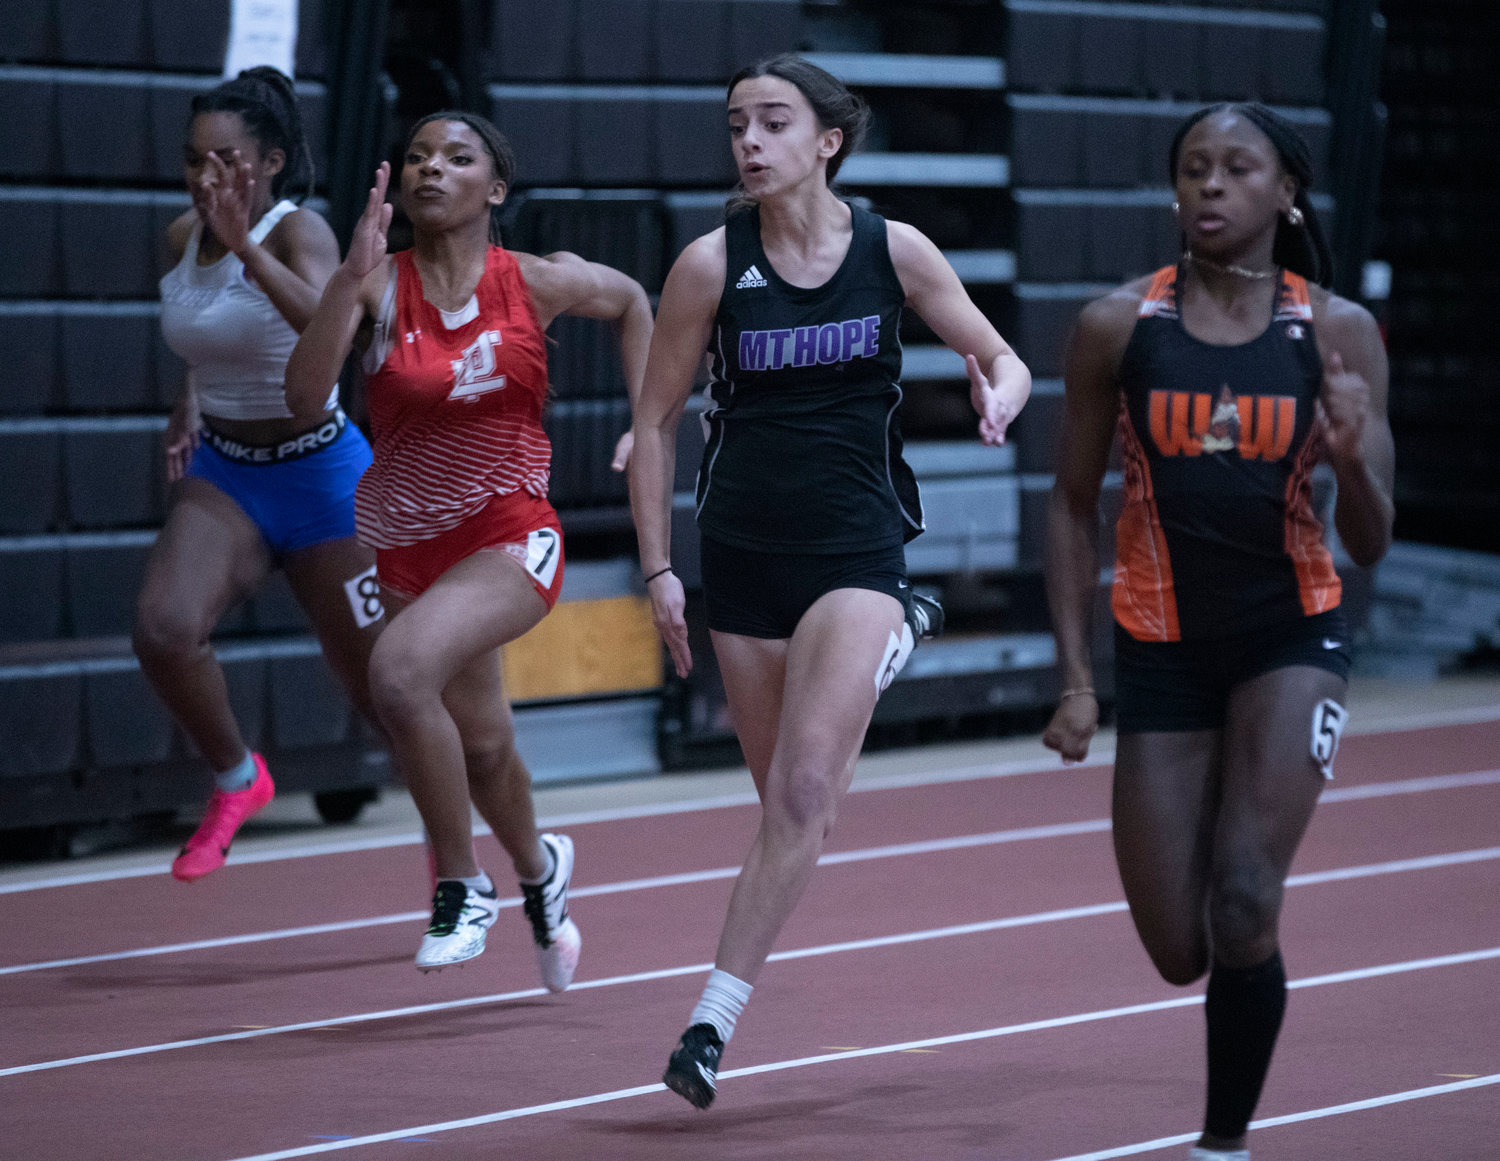 Thea Jackson, a sprinter, tallied 17 points and placed fourth in the 55-meter hurdles, second in the 55-meter run and fifth in the long jump.